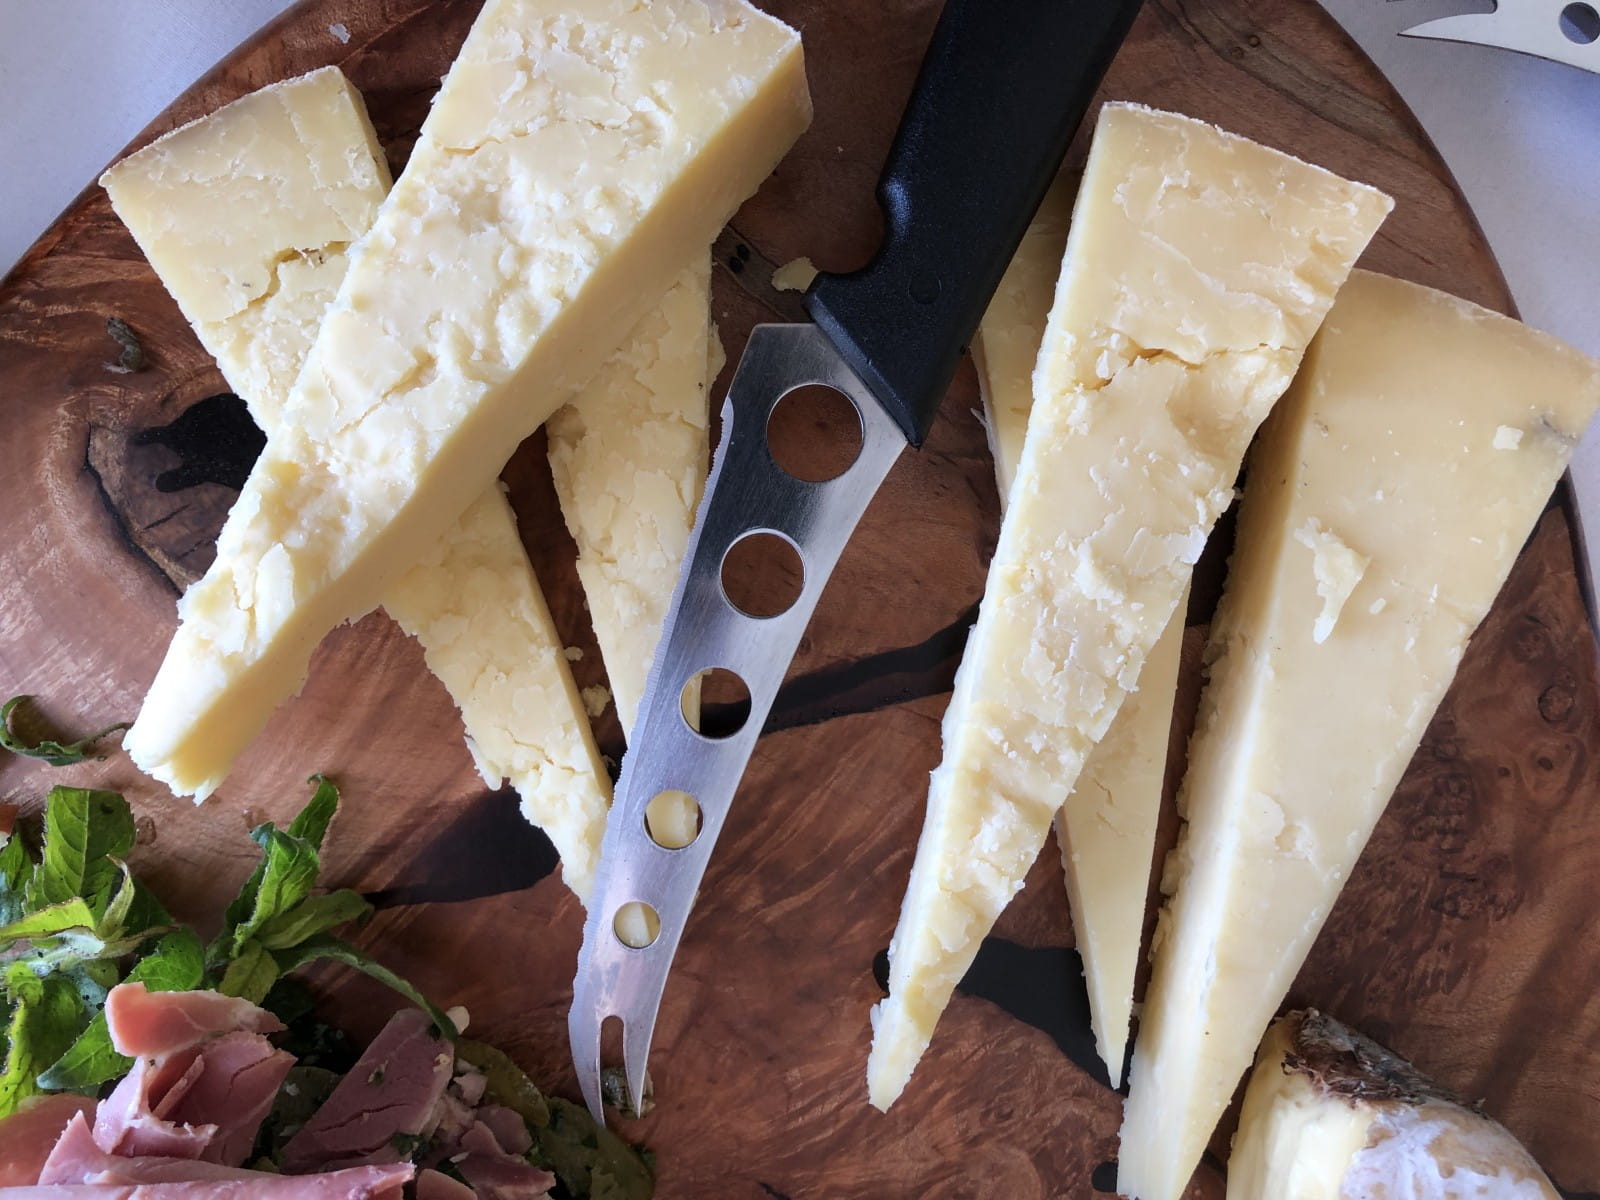 The best wine pairings for cheddar cheese